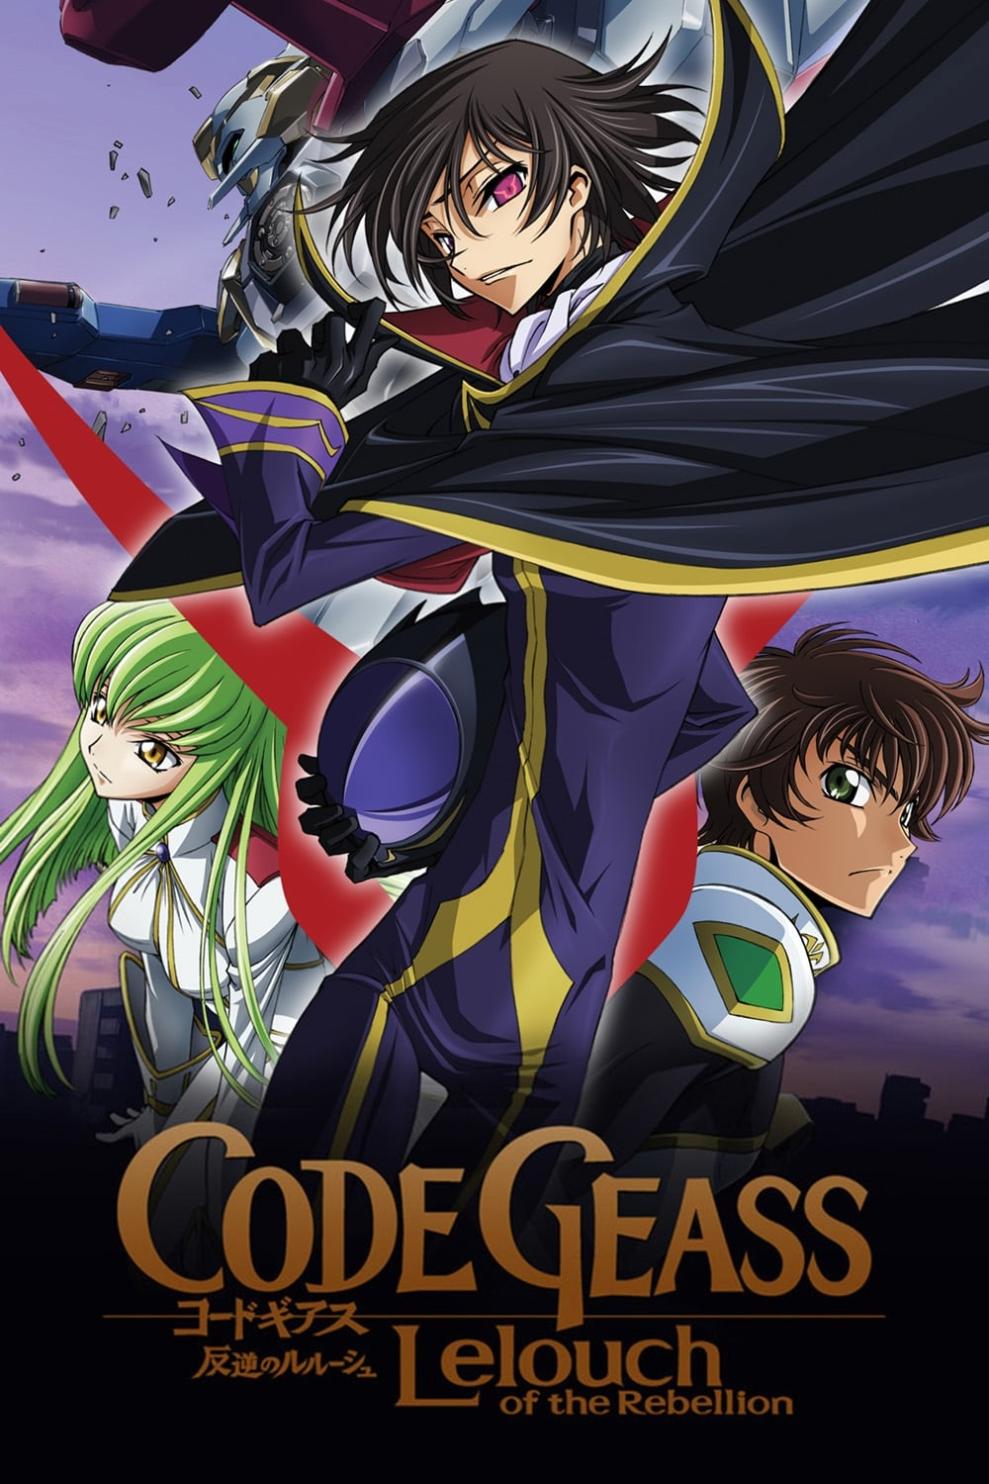 A Comparative Study of Code Geass and Other Mecha Anime Series